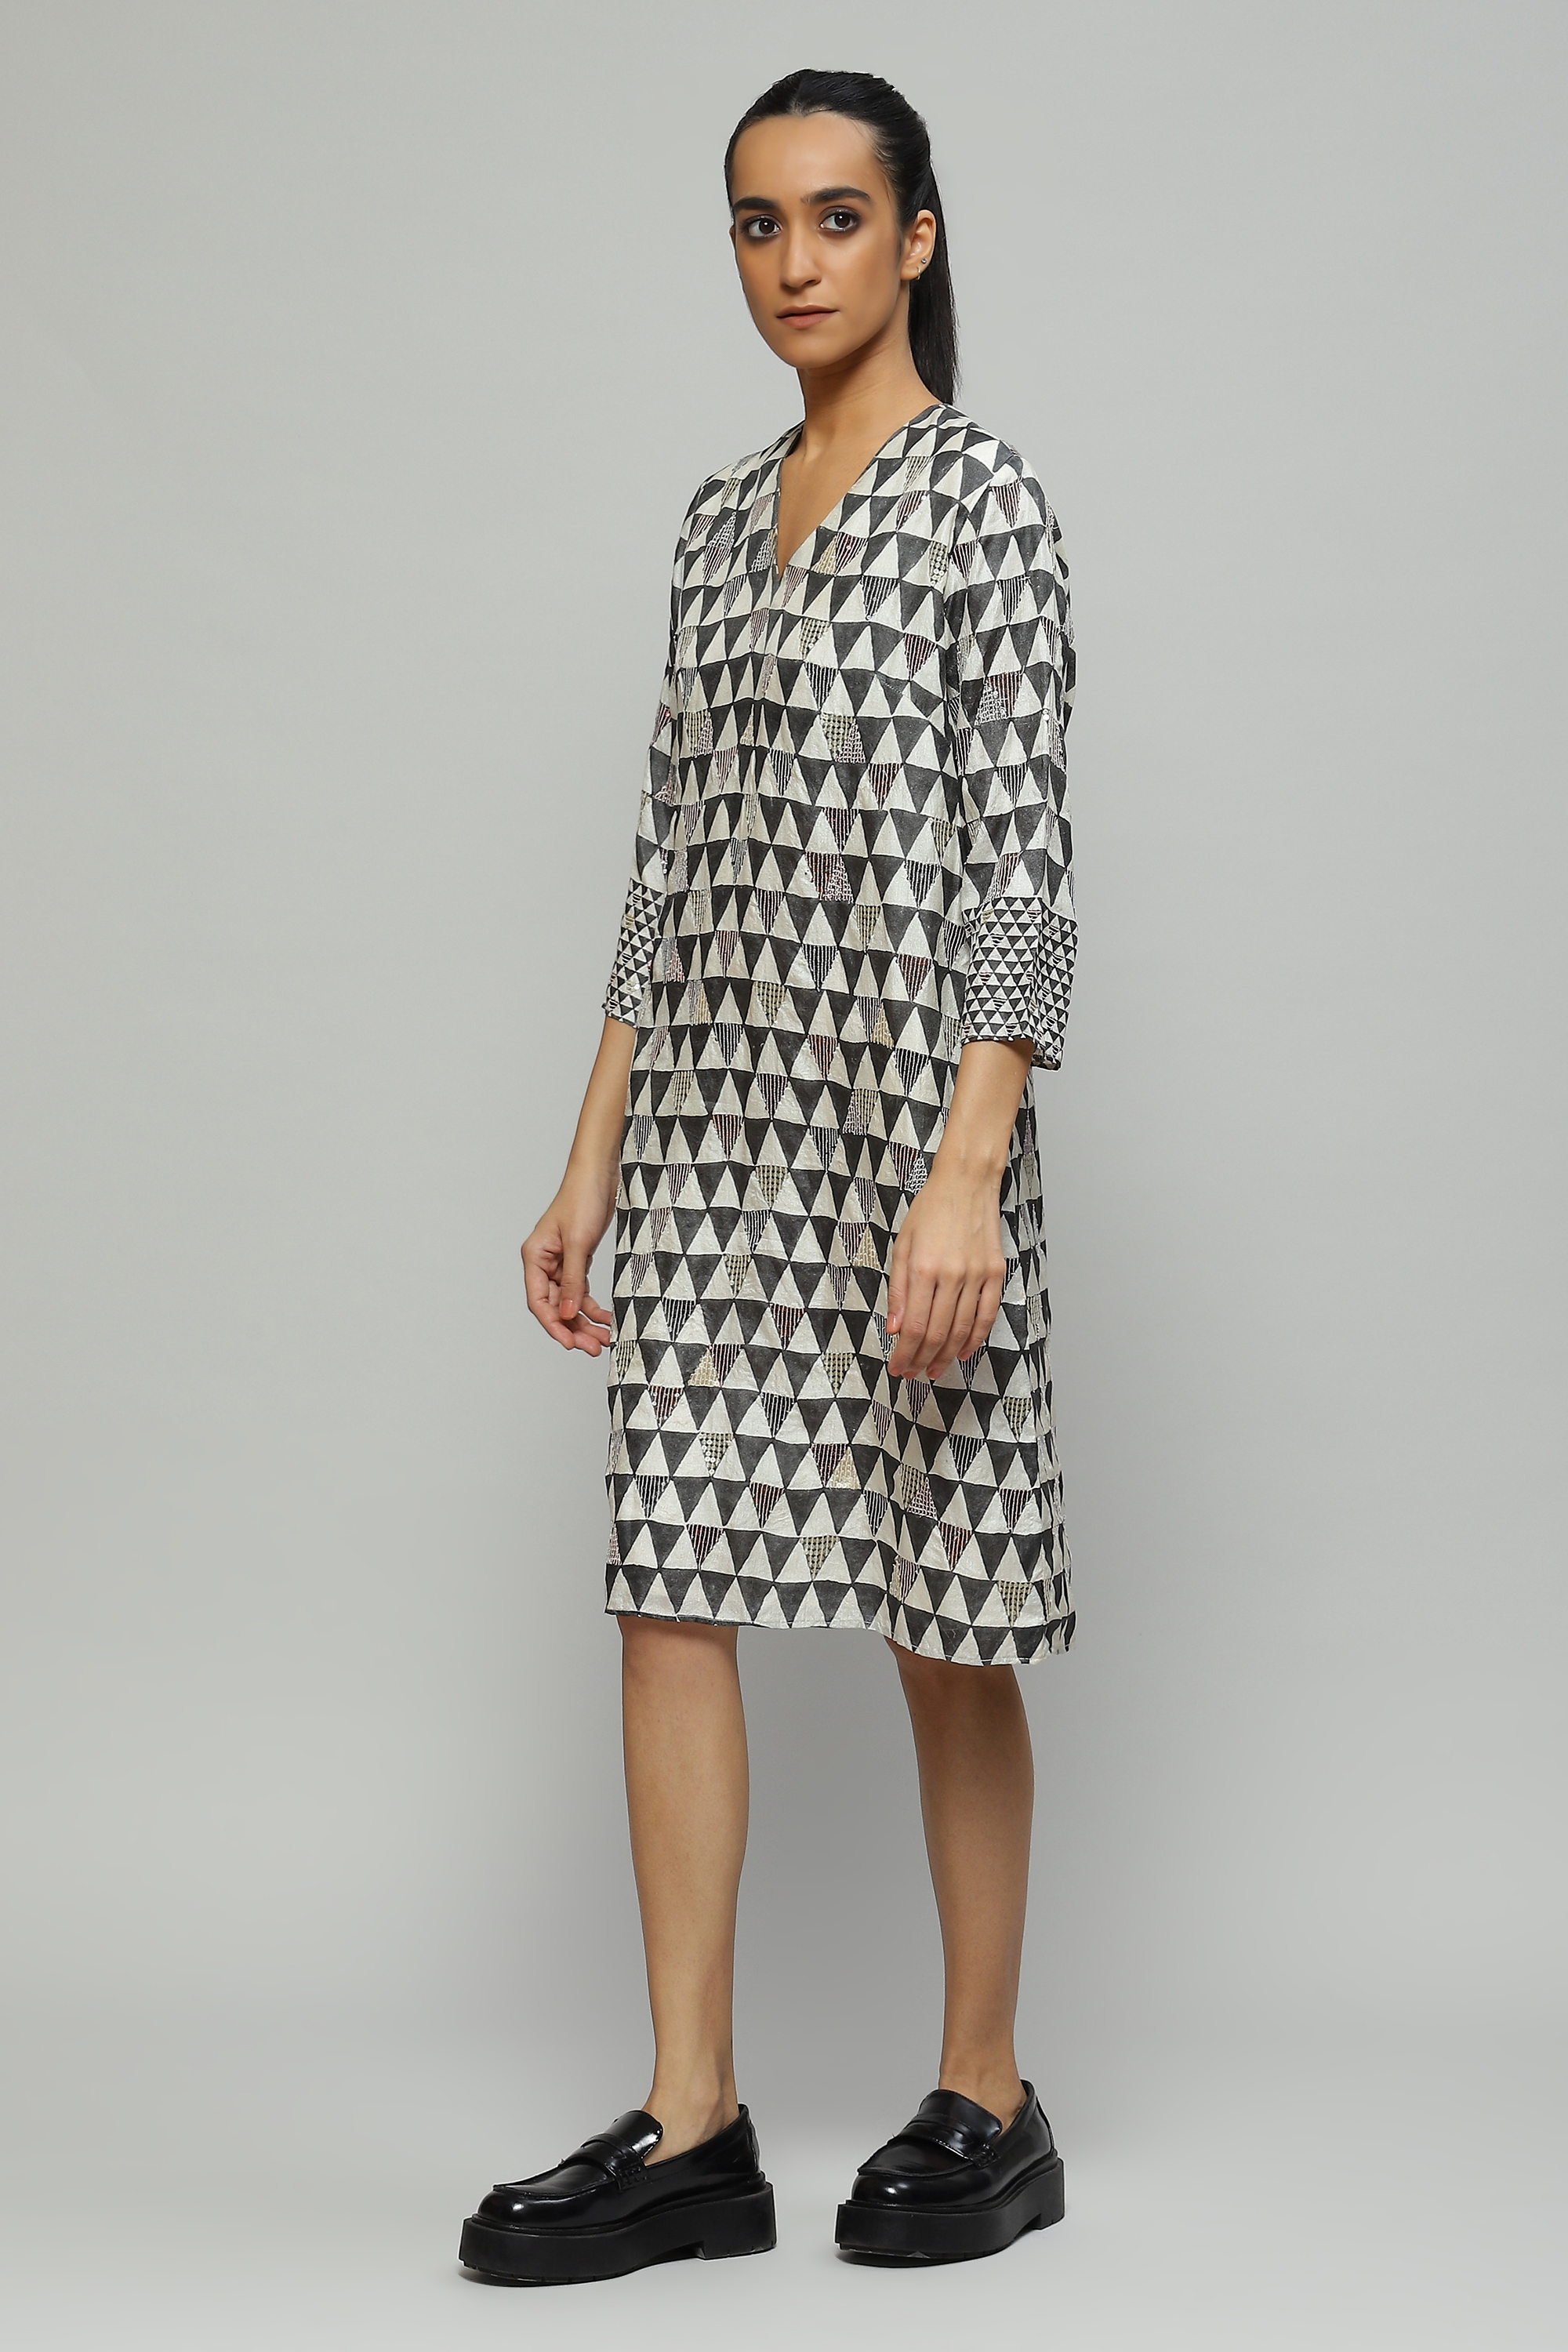 ABRAHAM AND THAKORE | Hand Block Printed And Sequinned Dress